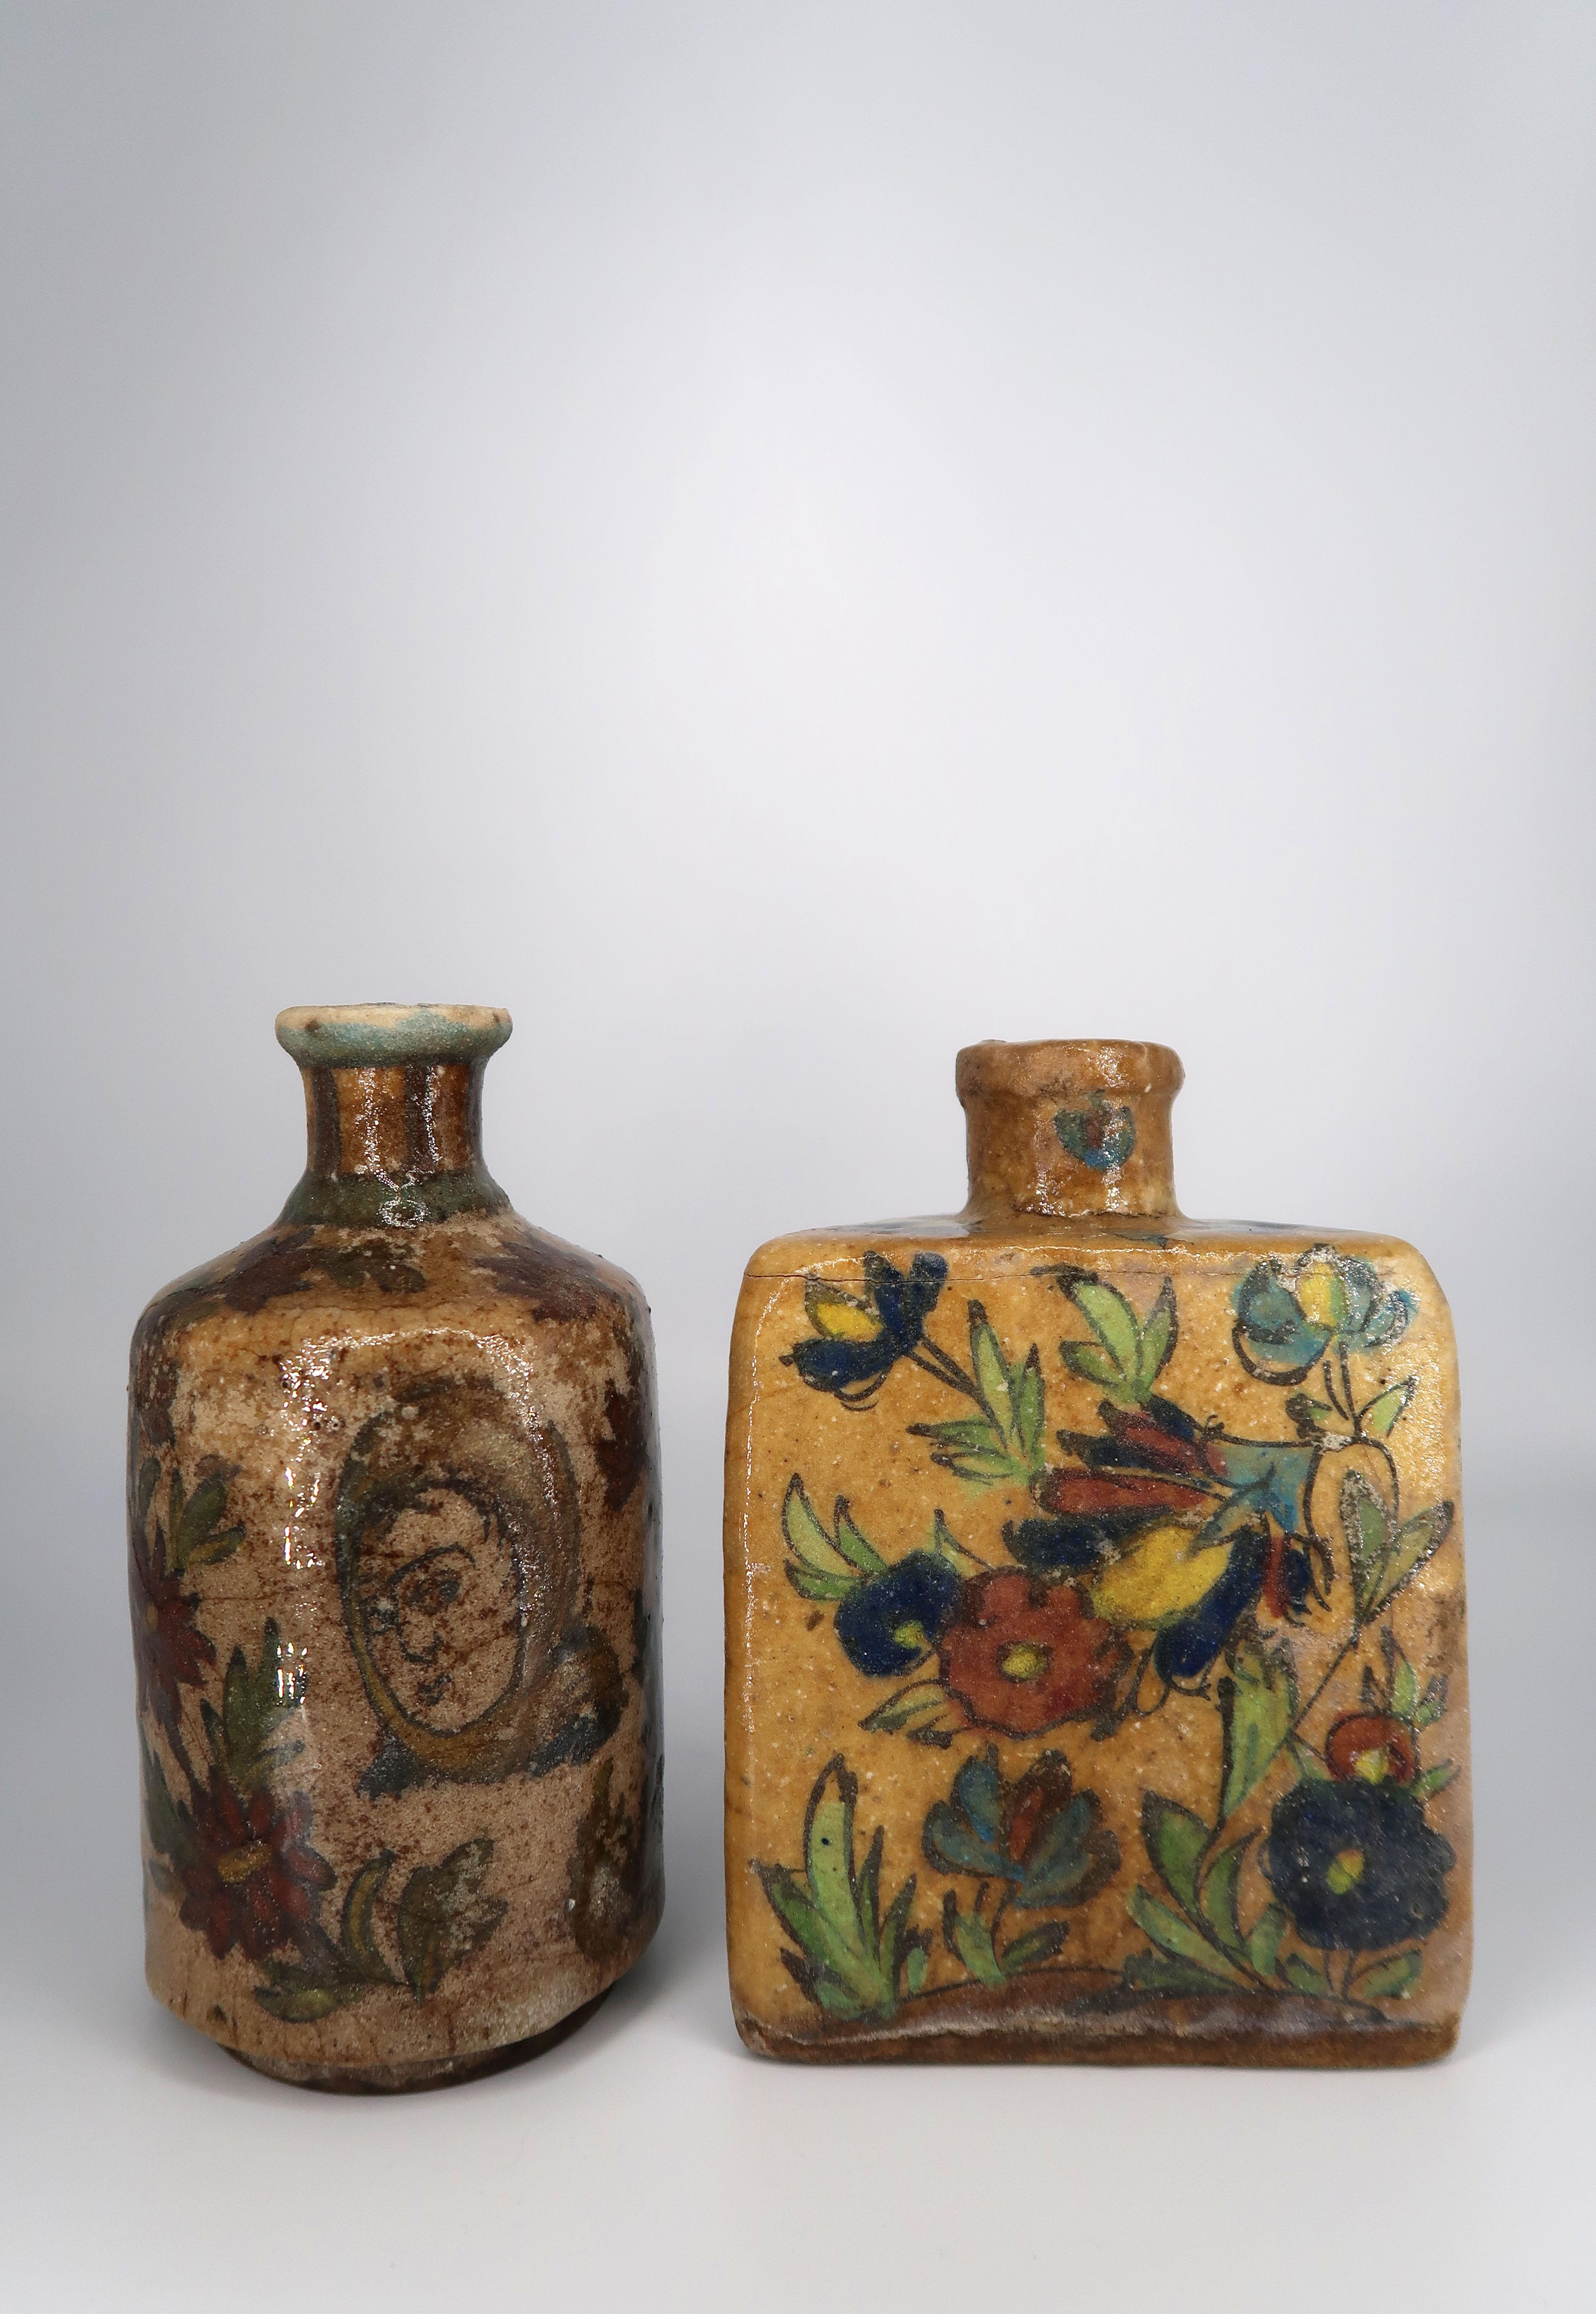 Two magnificent Middle Eastern antique handmade ceramic tea bottles with hand painted highly colorful decor and clear glaze. One round flask, one triangular. Dark and light blue, burgundy, yellow, green and red floral decorations with a female